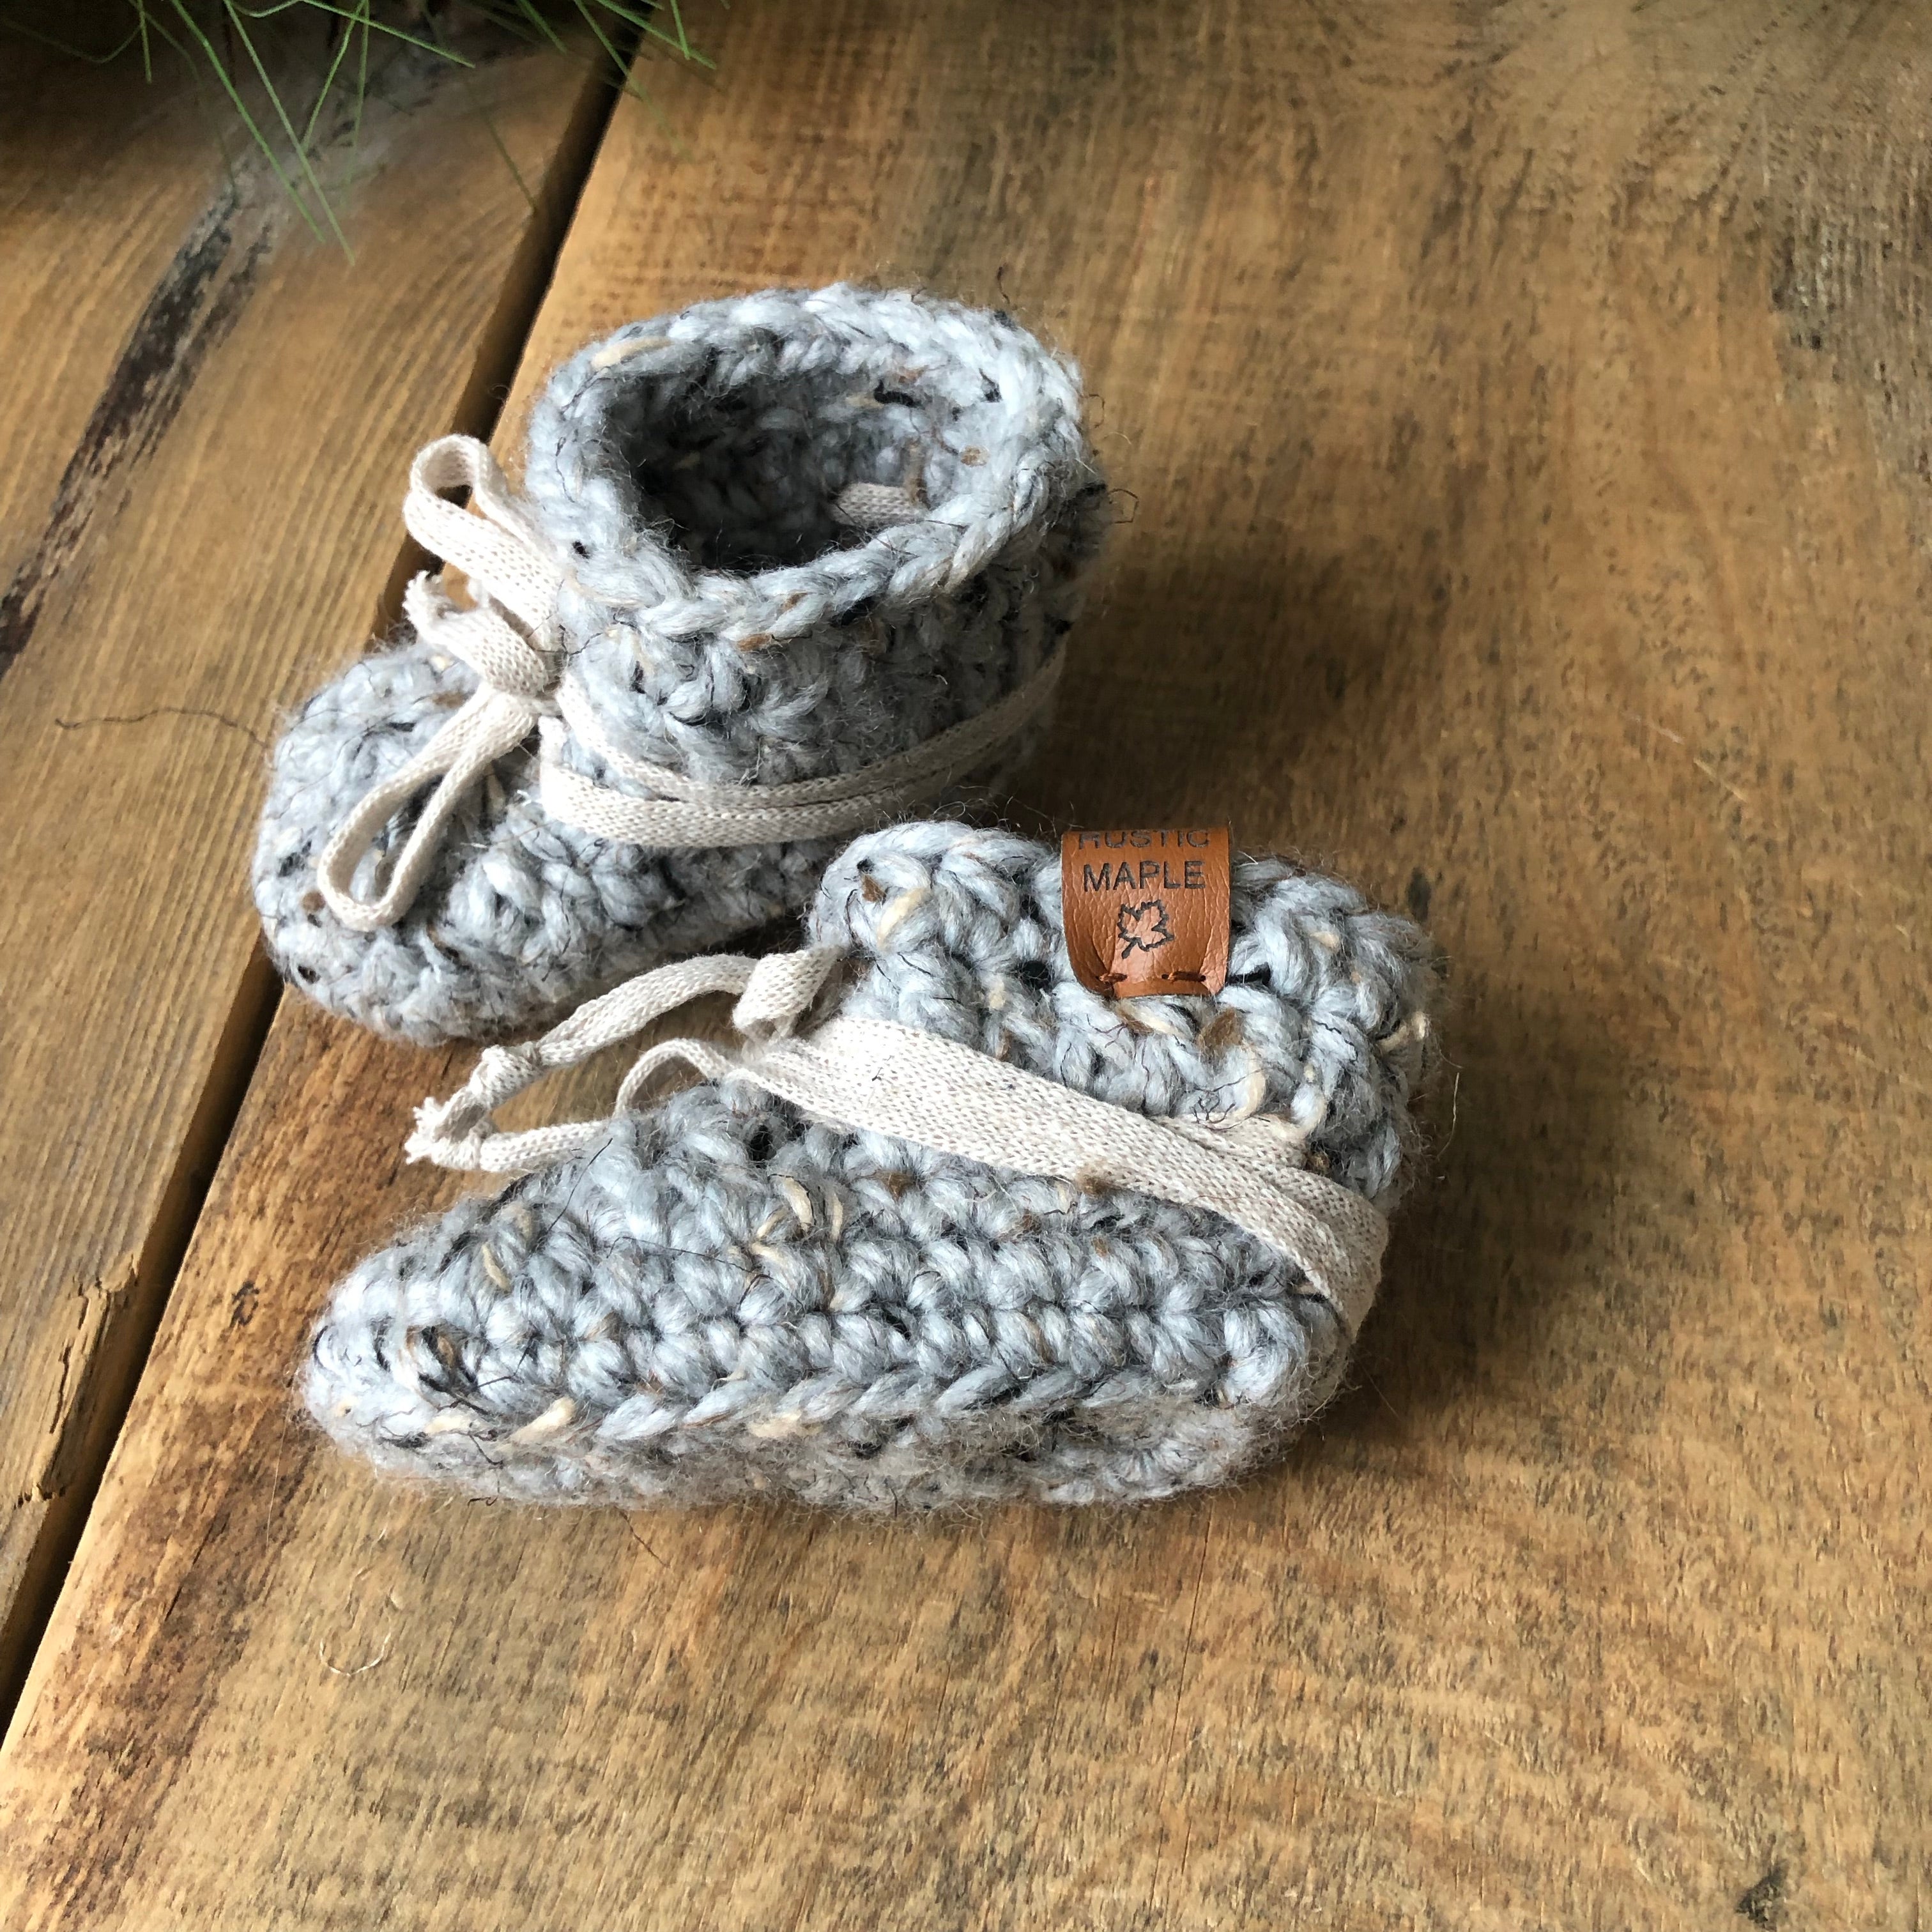 Chunky Baby Booties Infant First Soft Slipper Boots